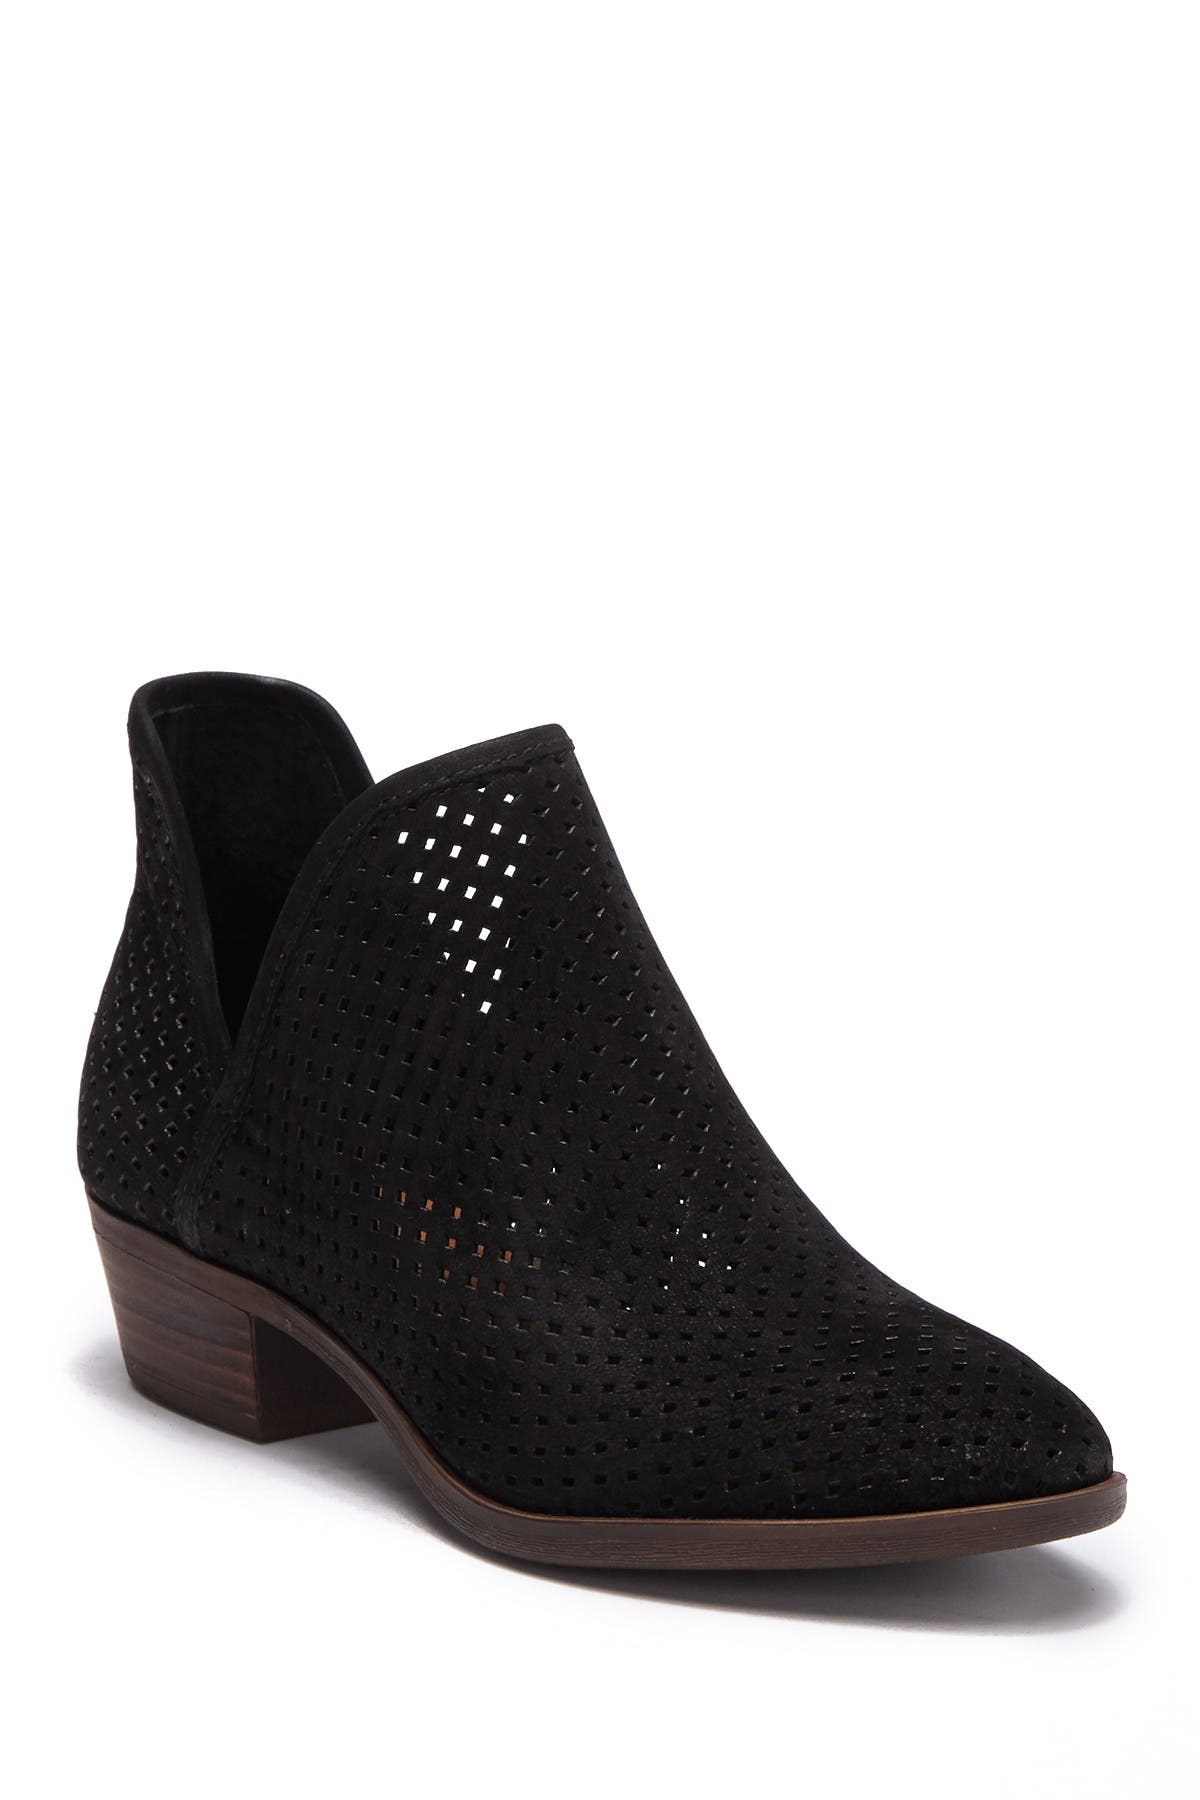 lucky brand brooklin perforated suede bootie